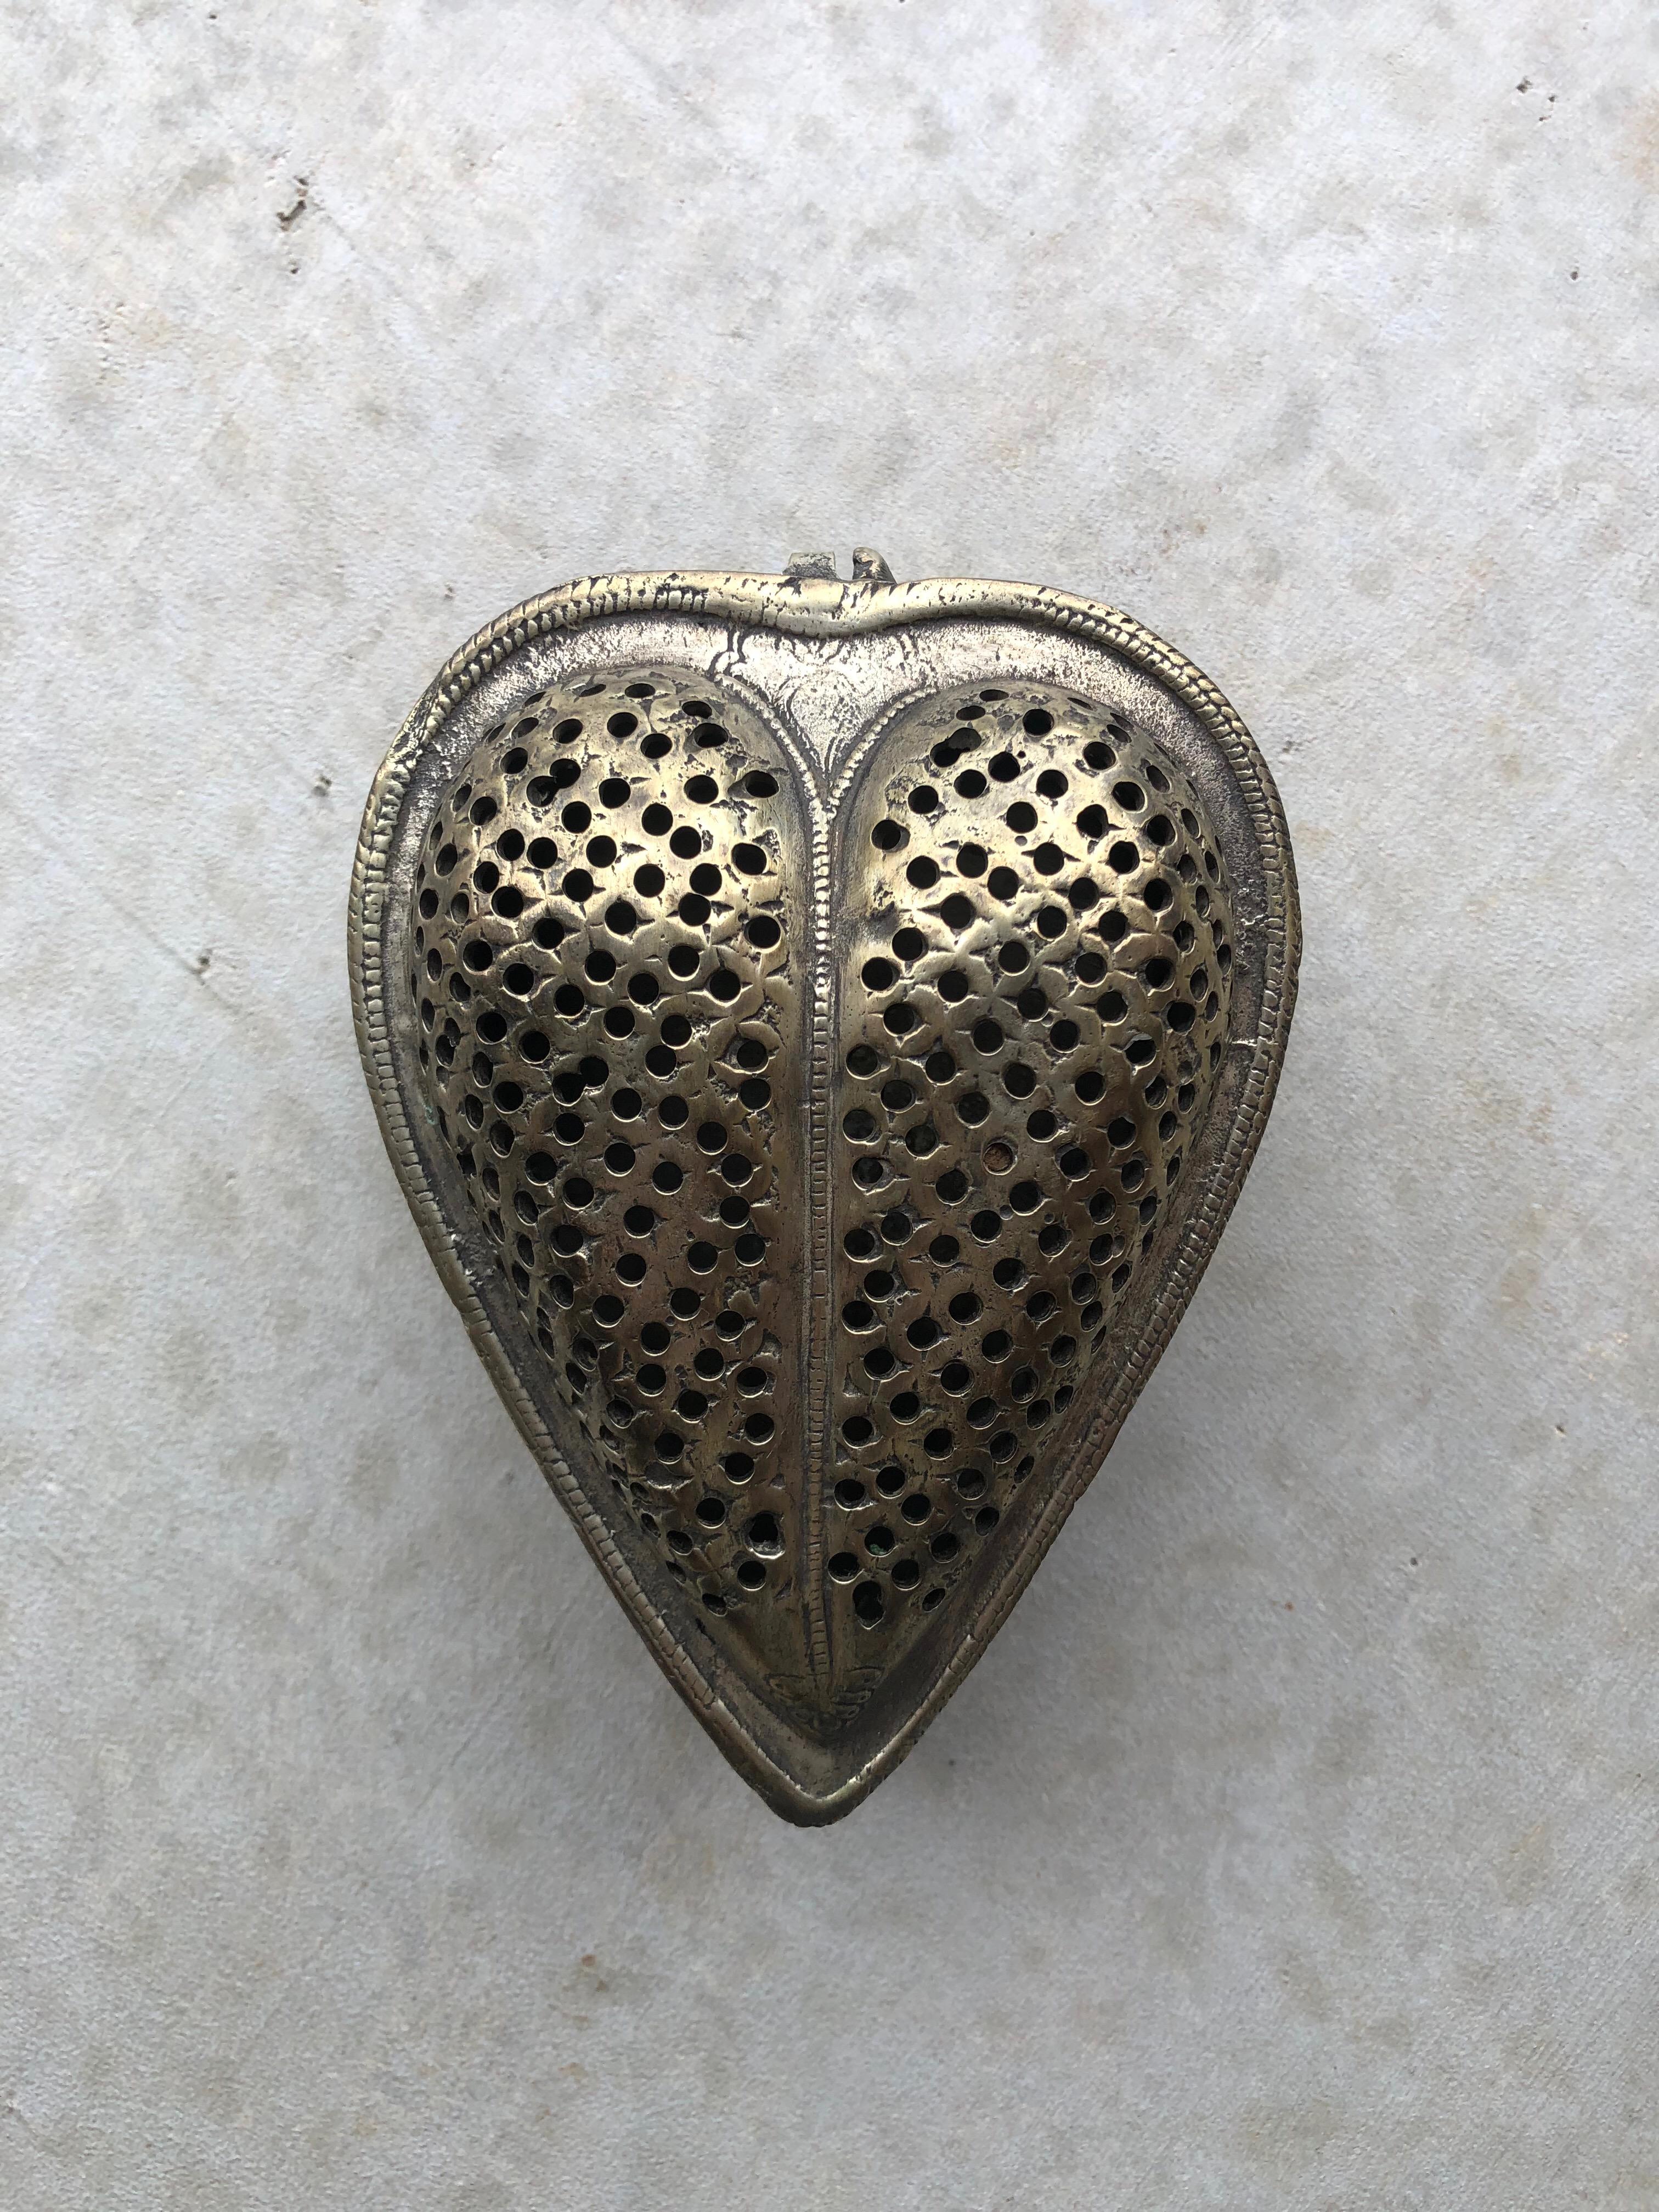 Sweet and sentimental heart shaped metal box. With a subtle patina, this antique piece features a domed heart lid, with a hinge, and punched metal details. Perfect as a keepsake memory box or as a sweet catchall piece.

4